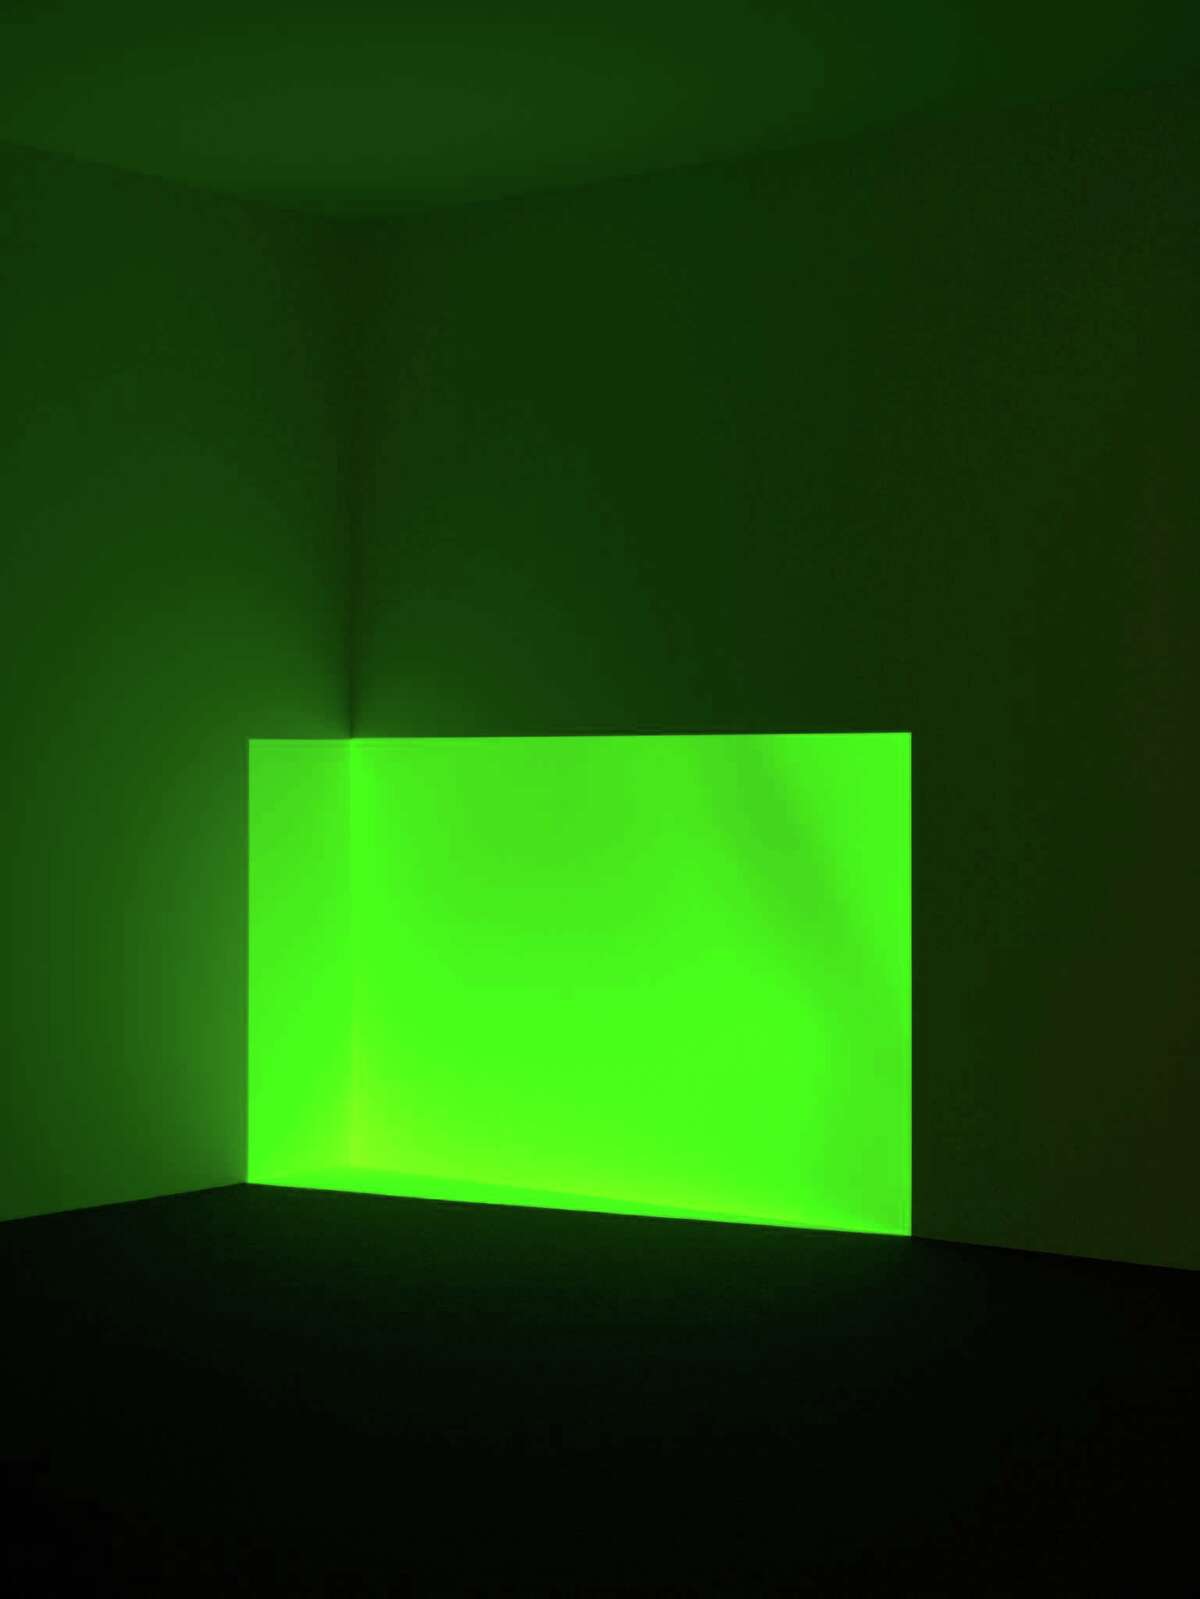 Sept. 22 is the last day to see "James Turrell: The Light Inside" at the Museum of Fine Arts, Houston.